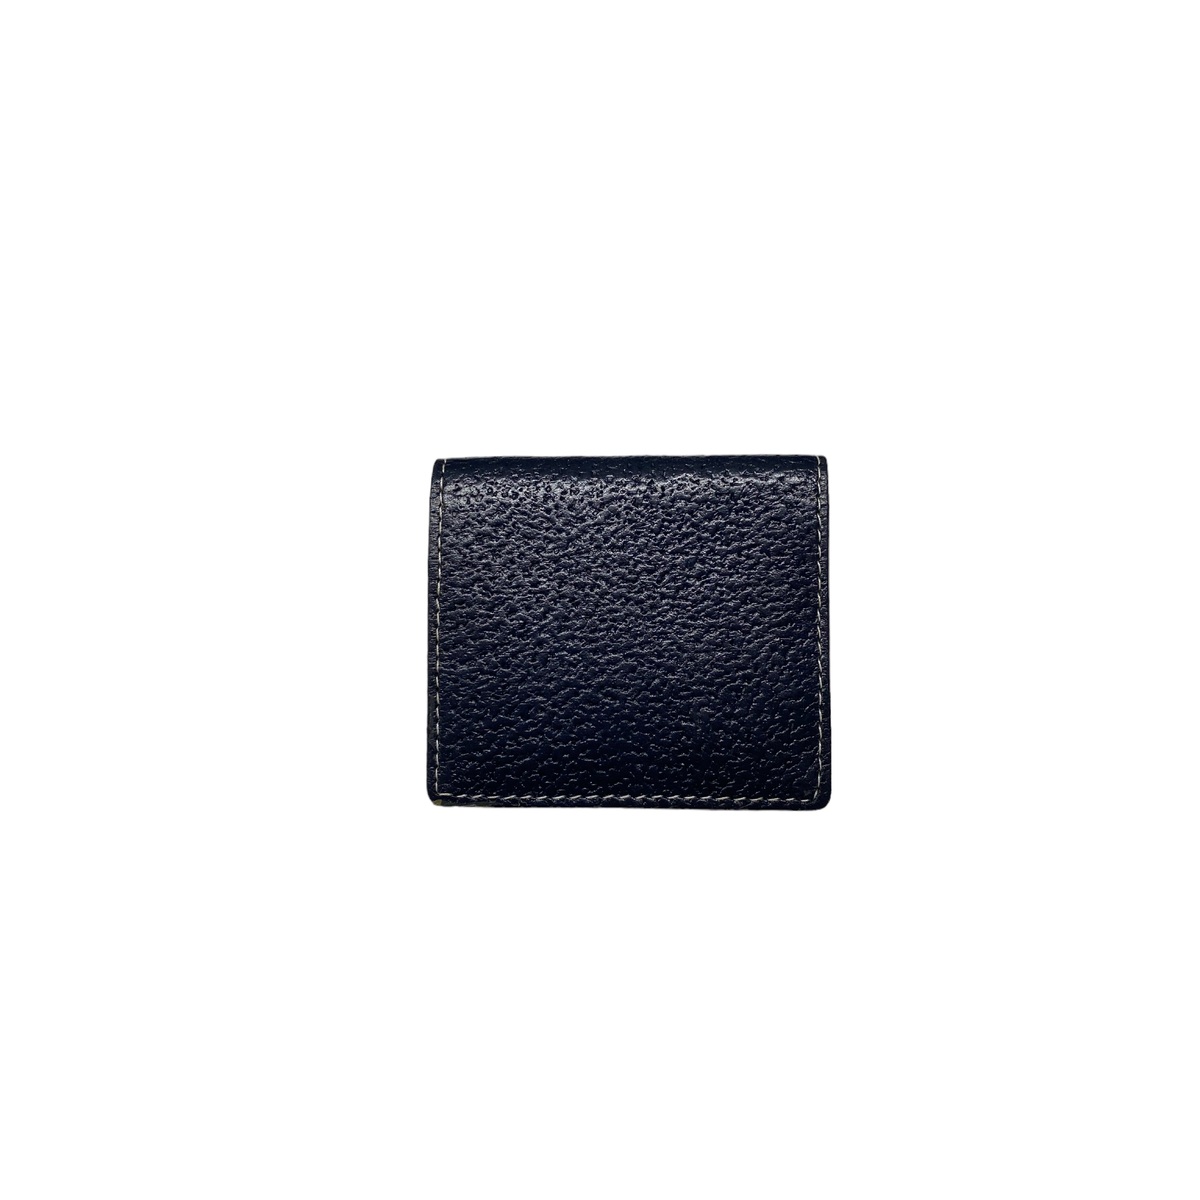 VW7614 Navy/Beige Cow leather